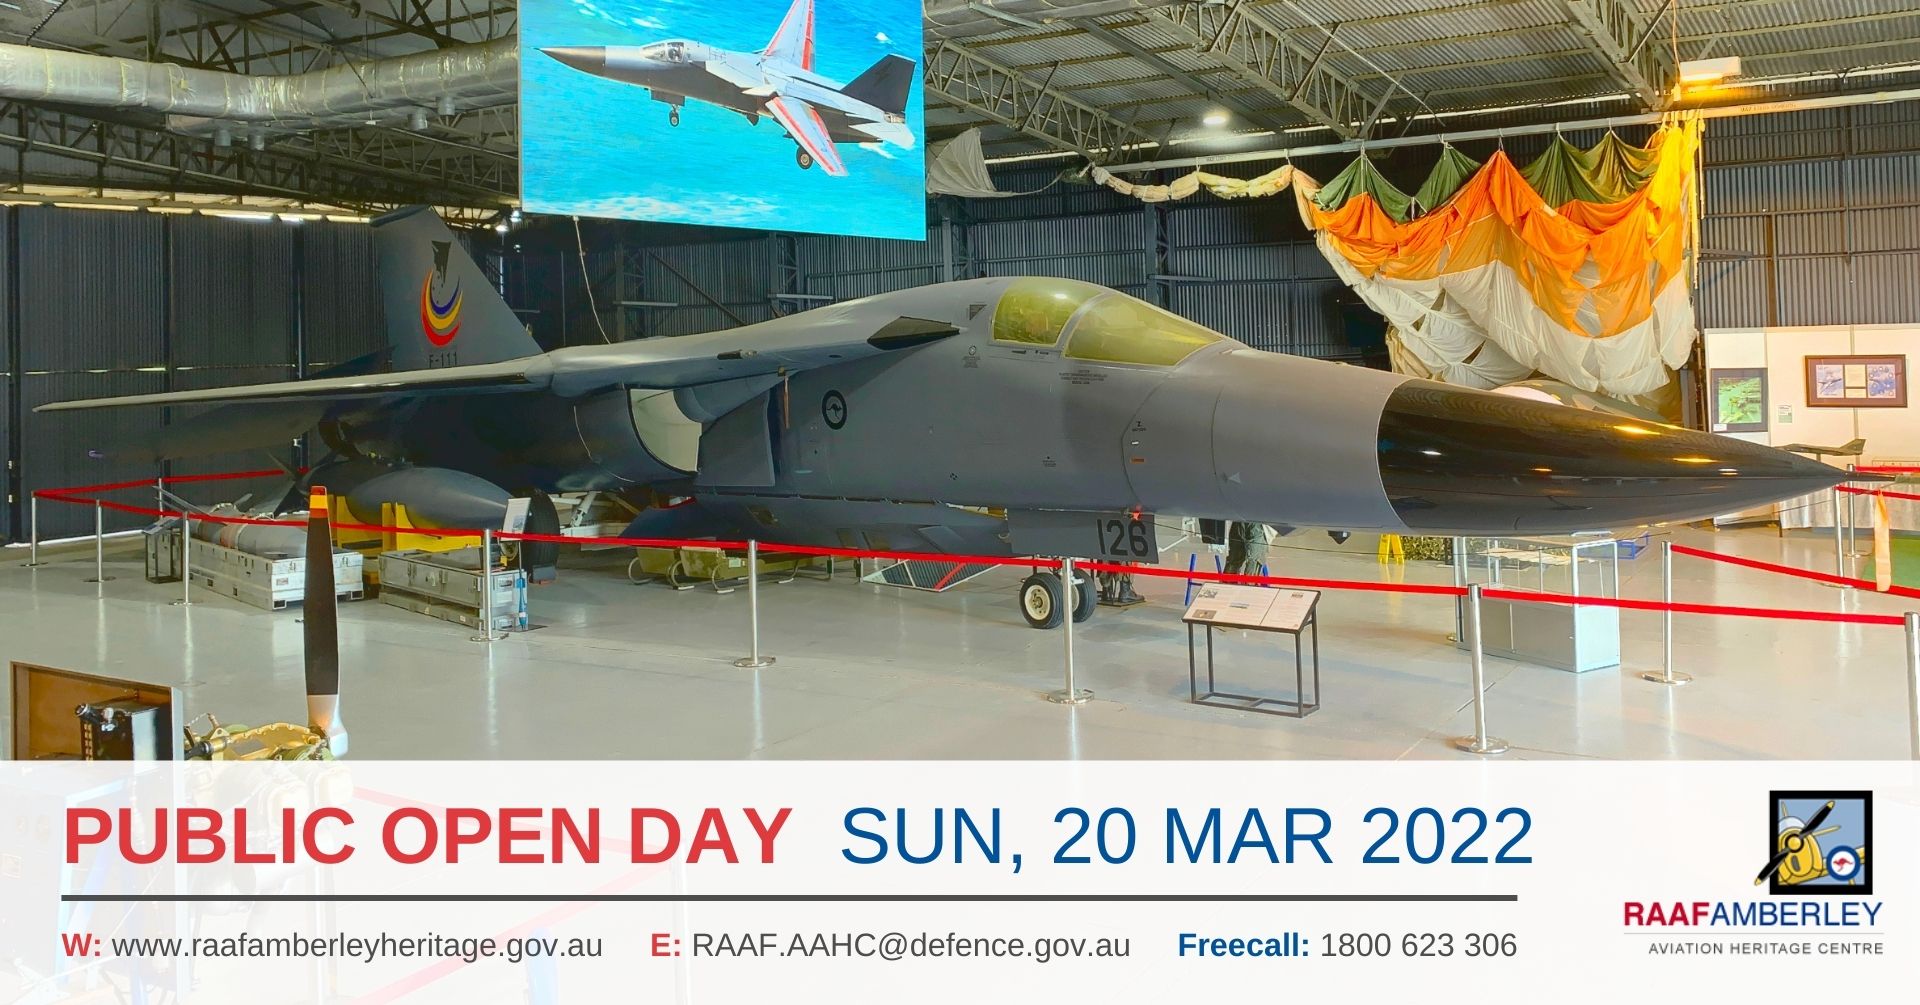 RAAF AAHC - Monthly Sunday Public Open Day - 20 Mar 22